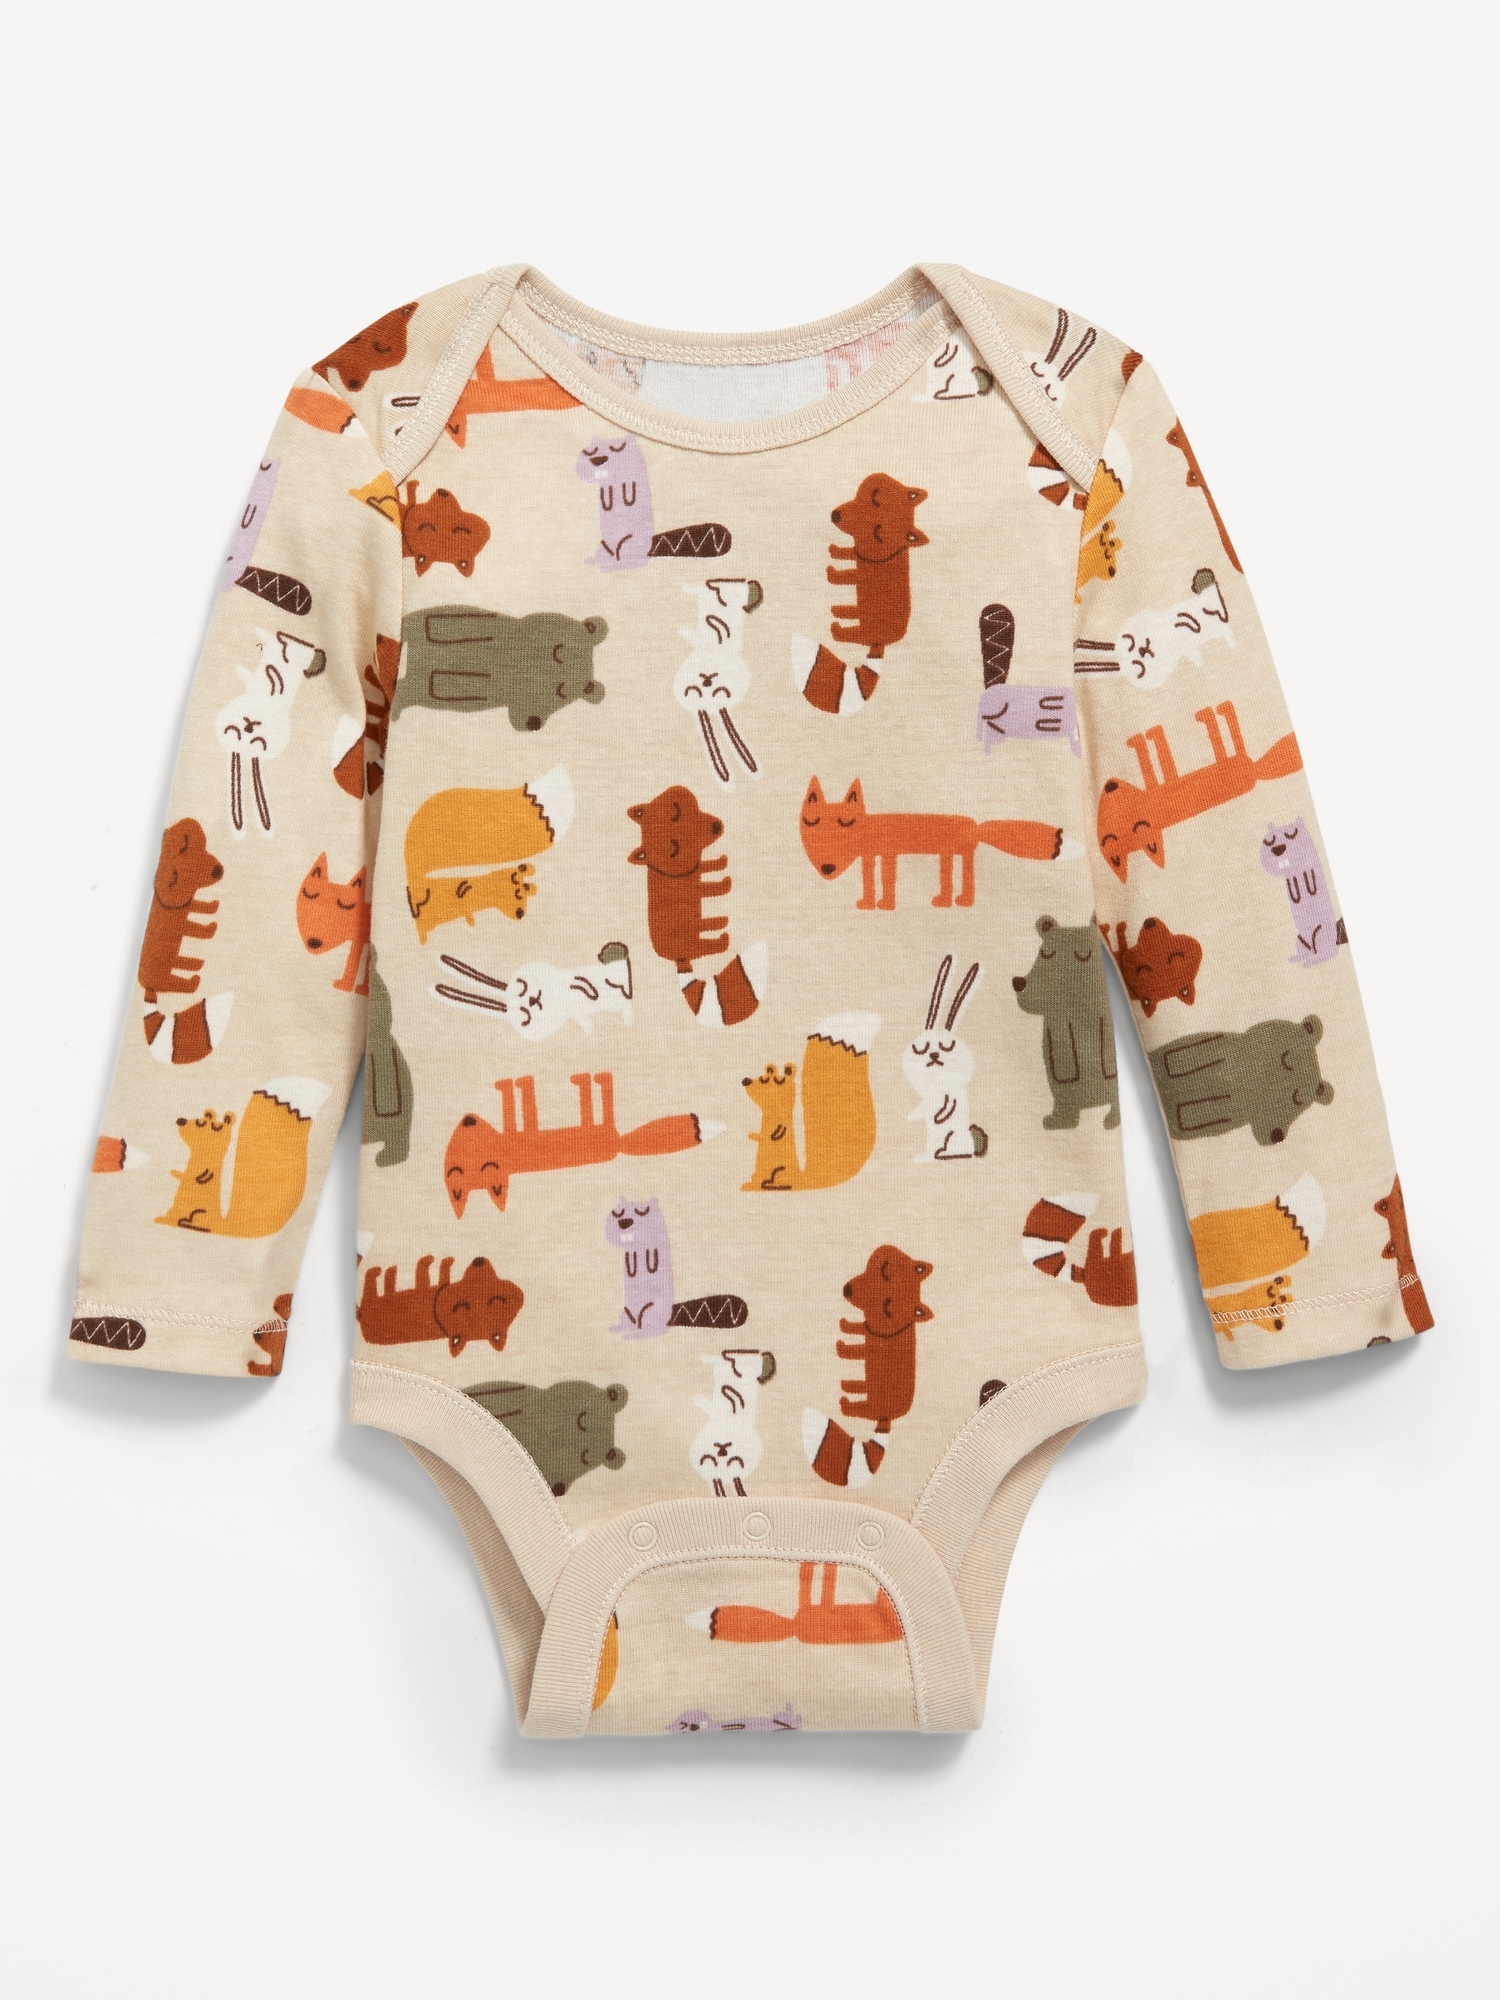 Unisex Long-Sleeve Printed Bodysuit for Baby | Old Navy